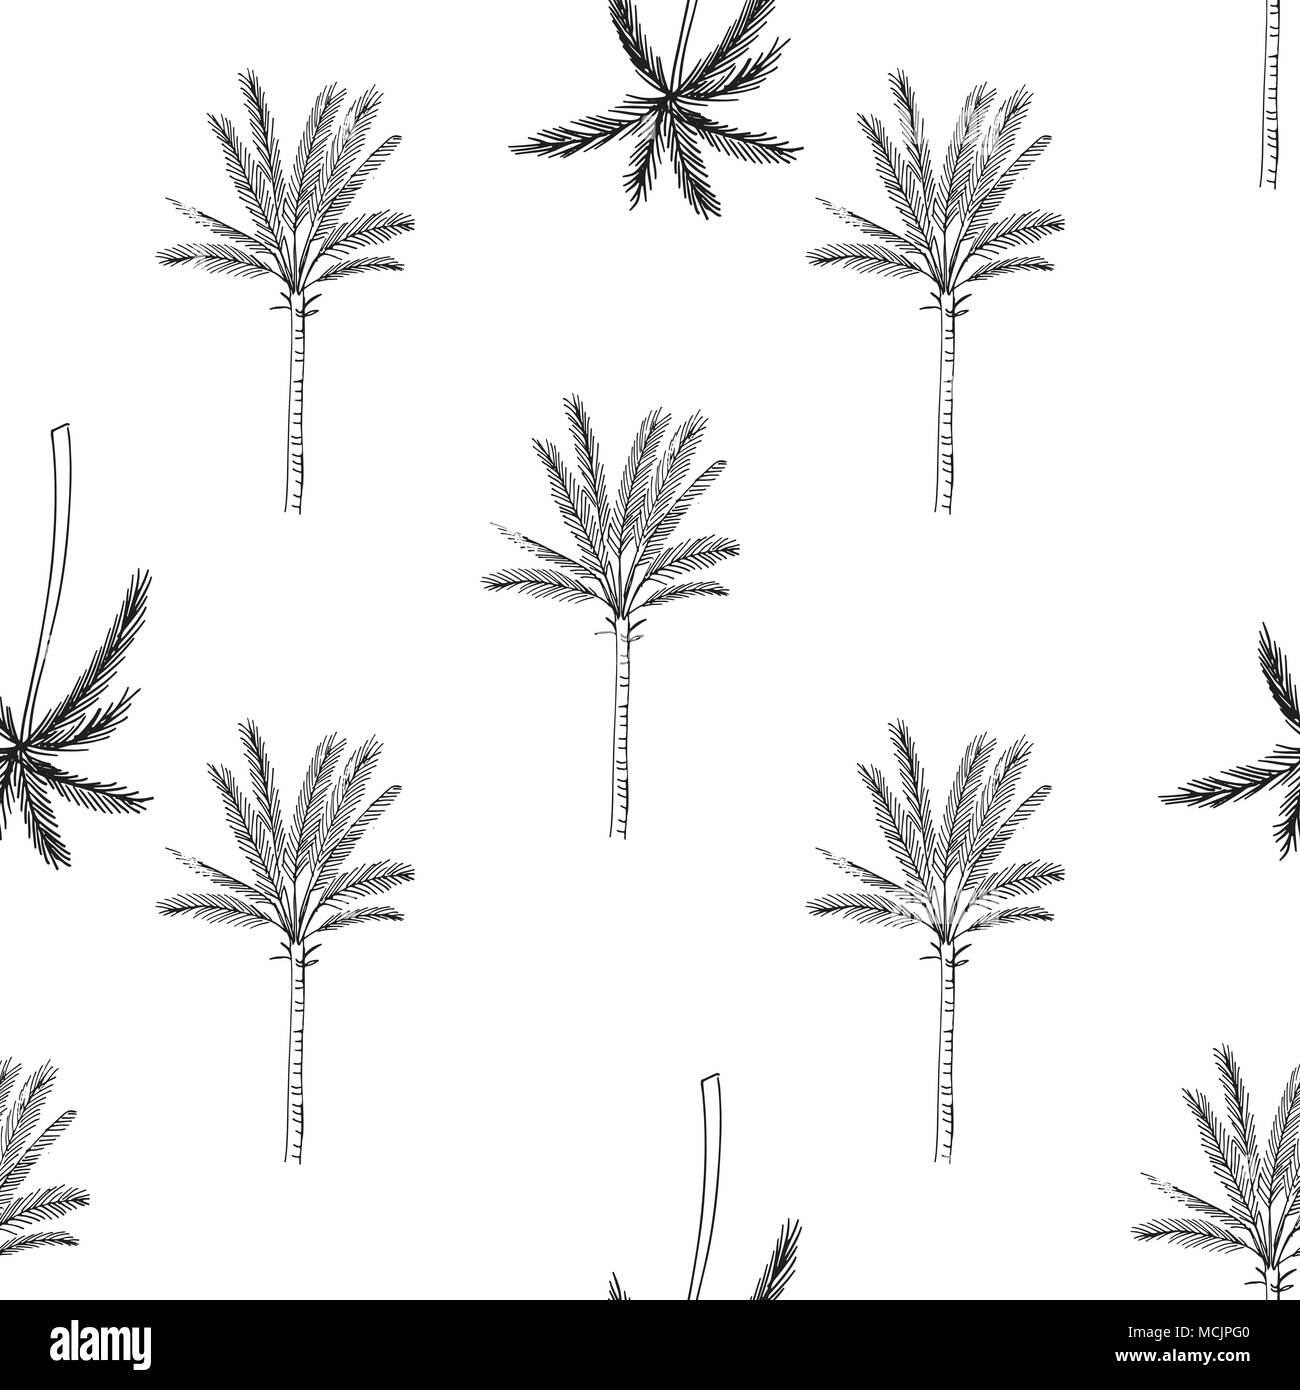 Hand-drawn seamless pattern with palm trees, isolated on white ...